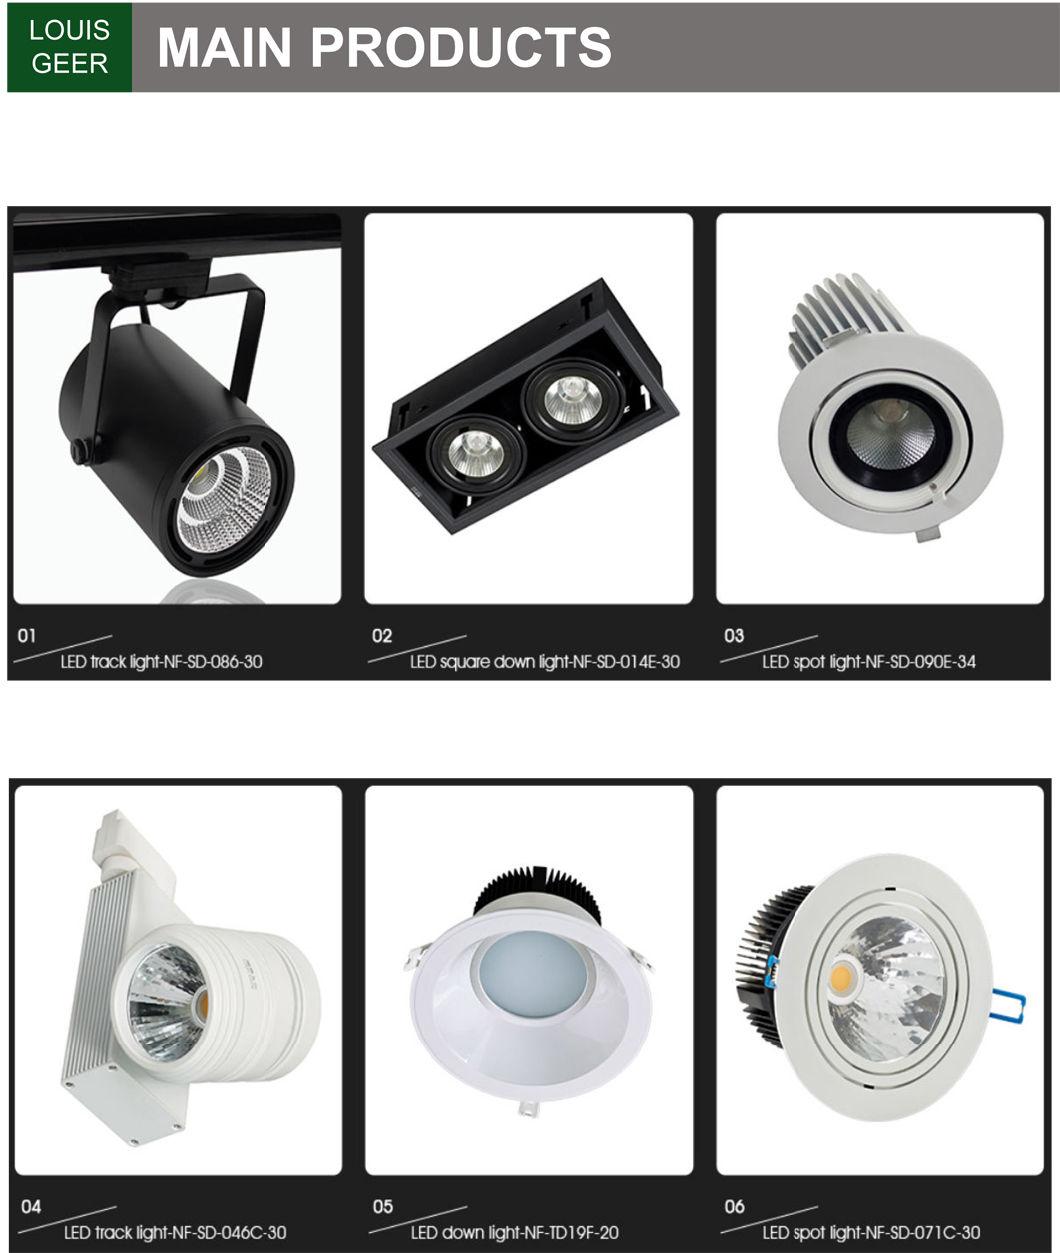 5W- 30W Family Series Round SMD Anti Glare Recessed Ceiling Light 220V Ceiling Downlight LED Down Light for Project